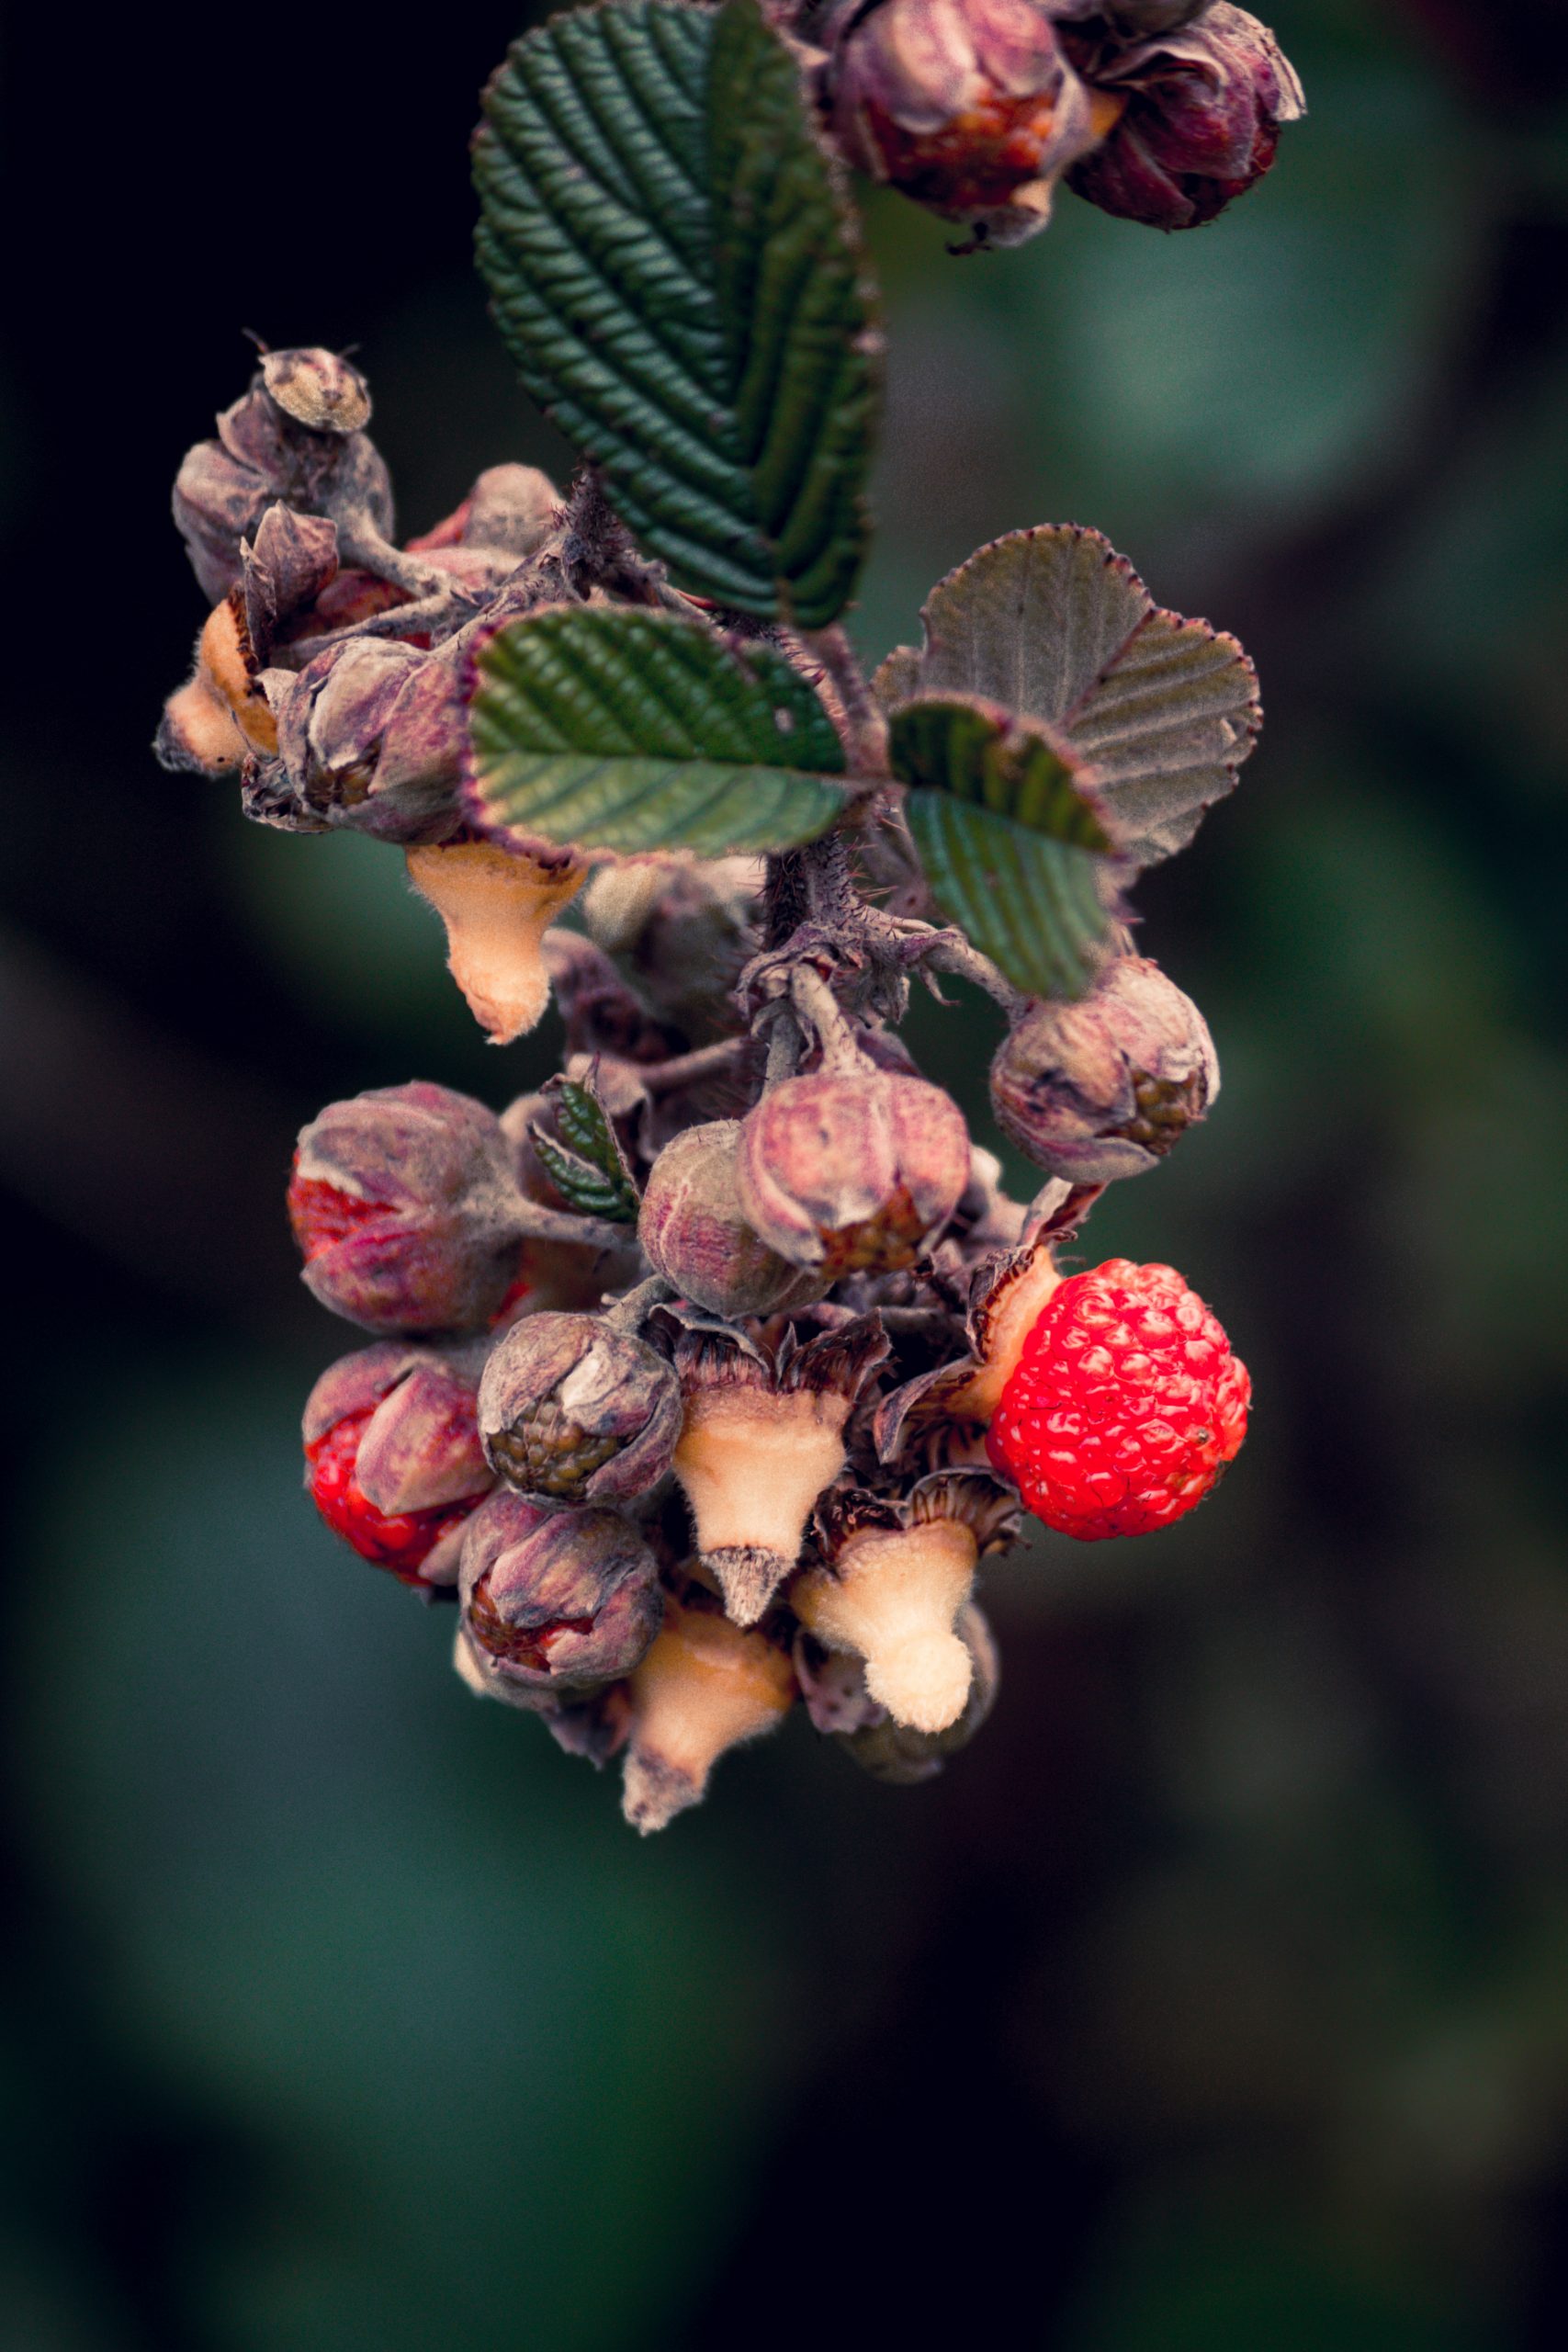 Red berries of a plant